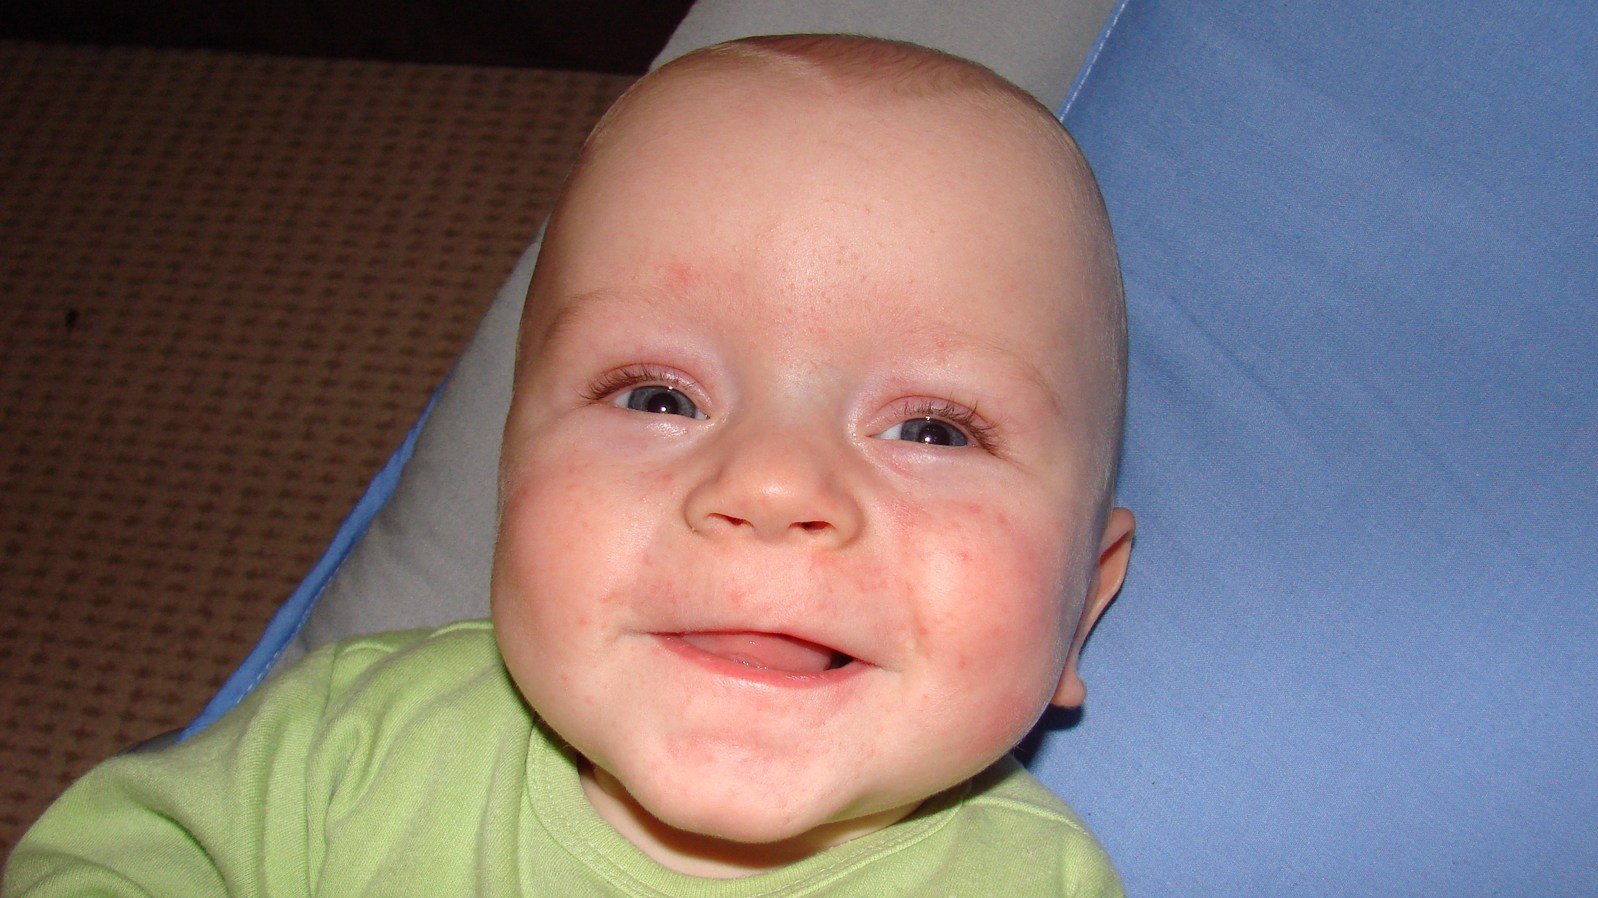 an infant boy wearing a green shirt and smiling